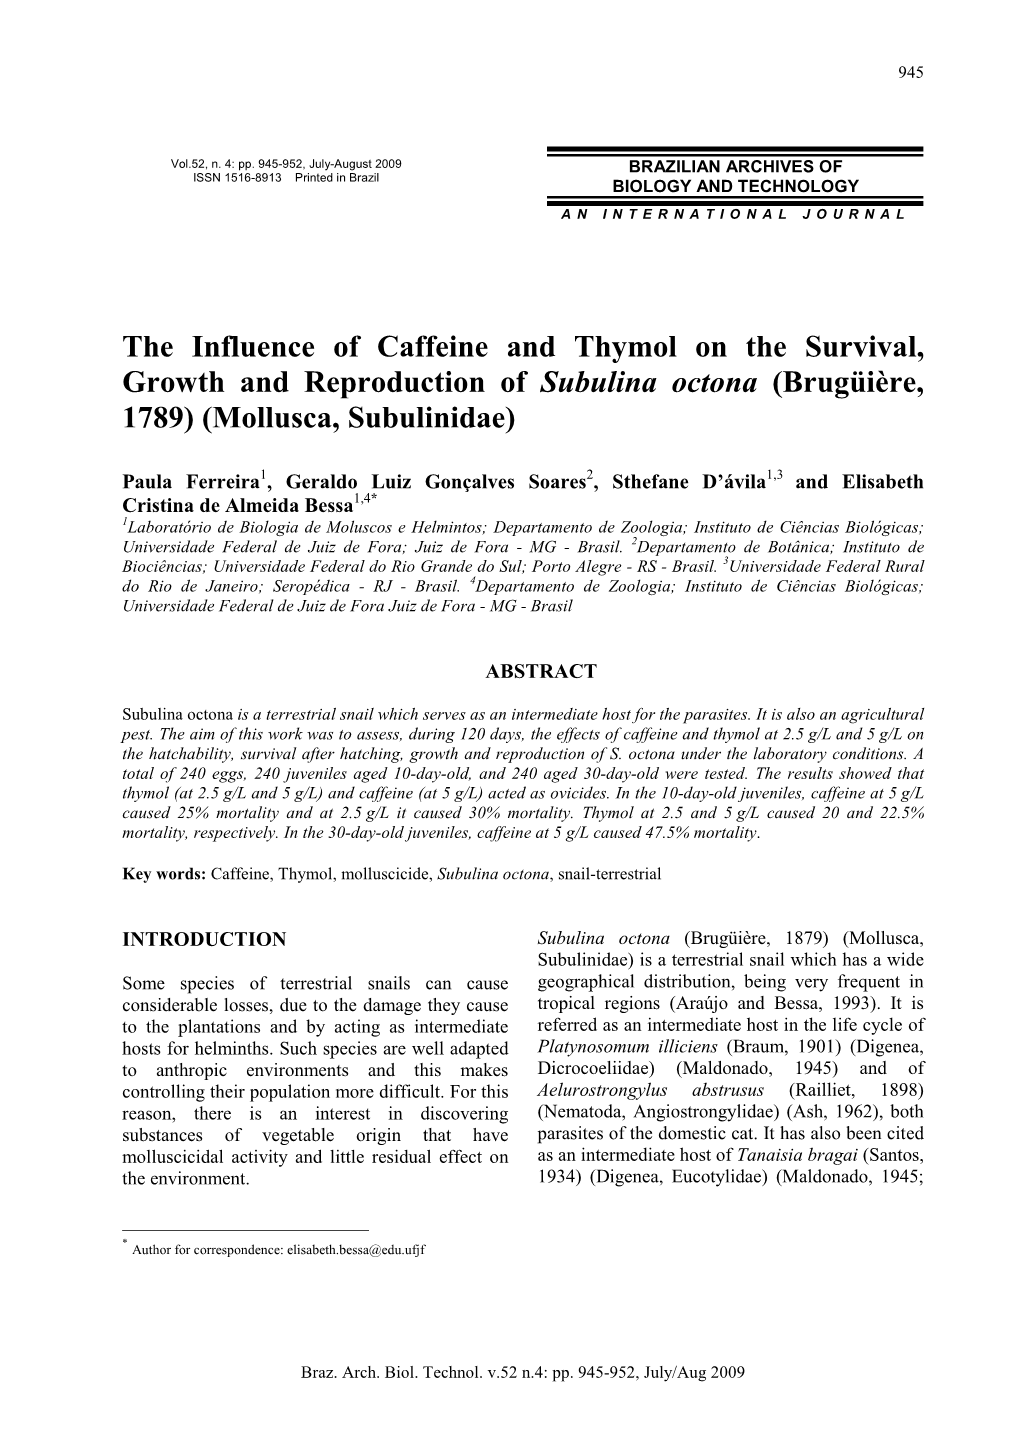 The Influence of Caffeine and Thymol on the Survival, Growth and Reproduction of Subulina Octona (Brugüière, 1789)(Mollusca, Subulinidae)